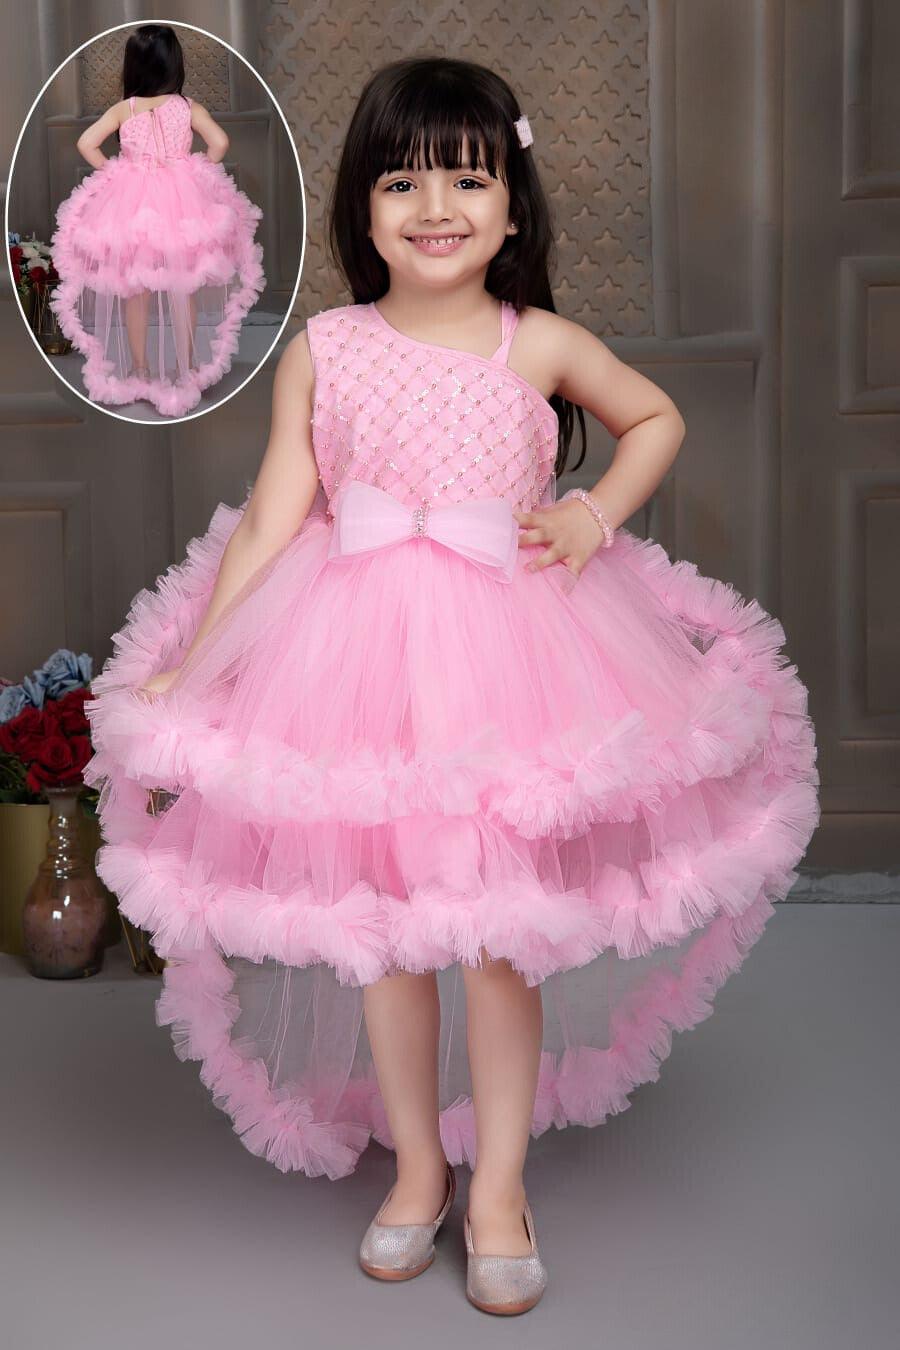 Pink Princess Perfection: Tailback Party Frock for Girls.